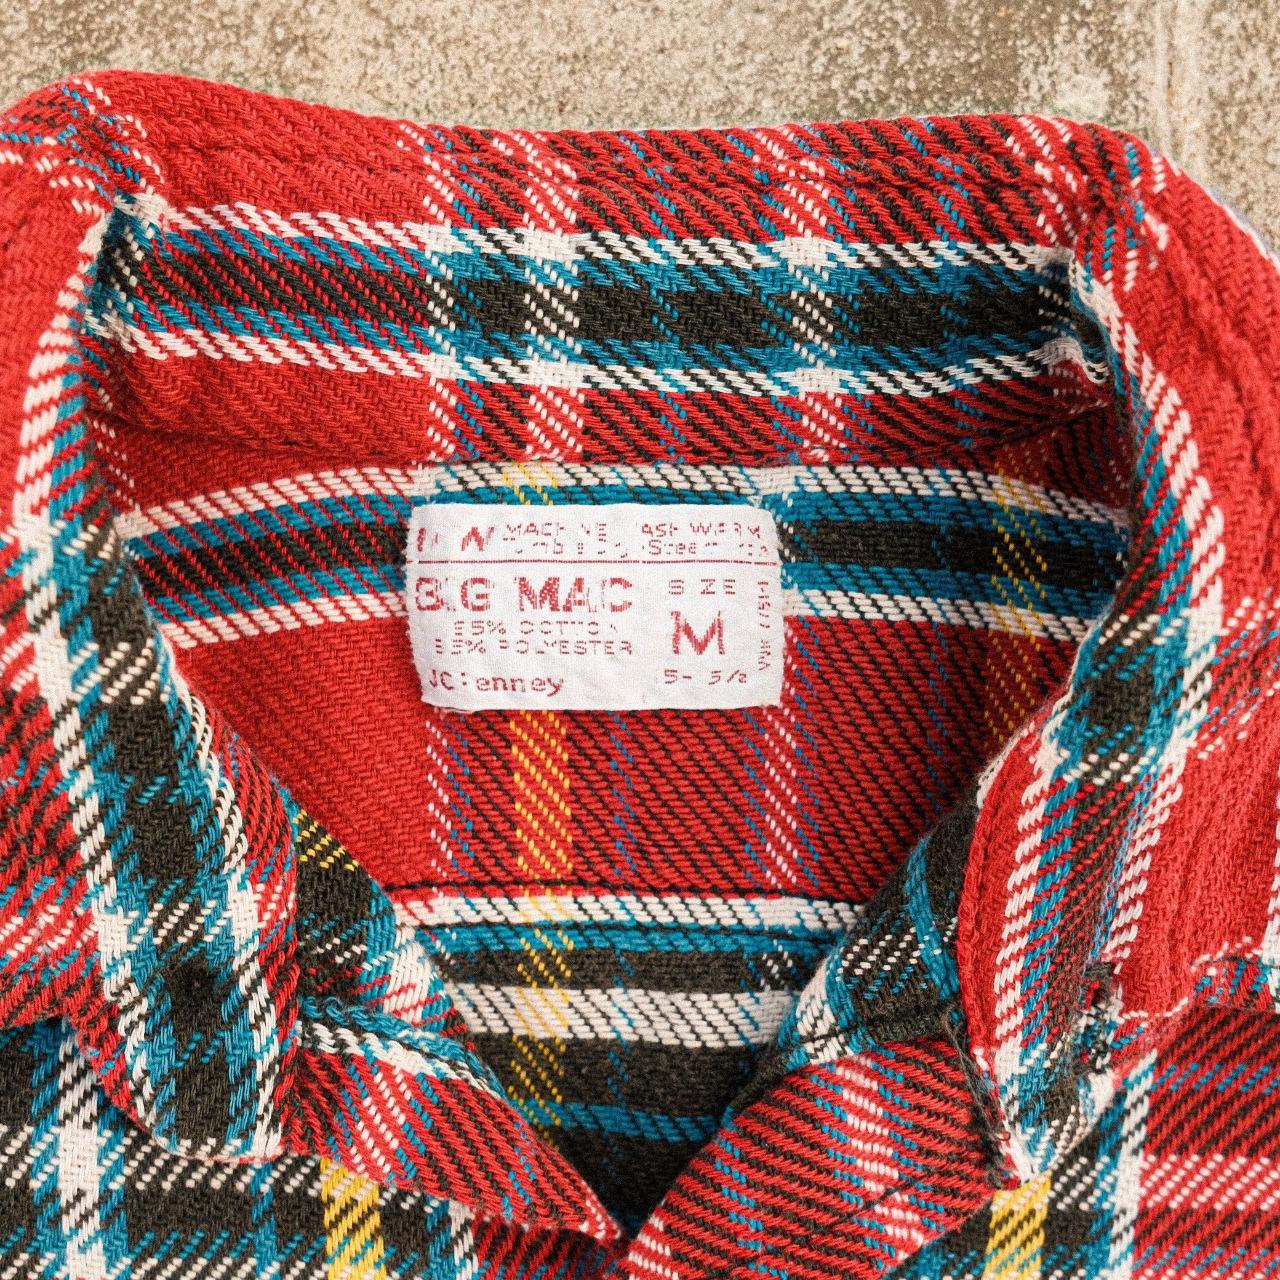 Product Image 4 - 1970s Big Mac cotton flannel.